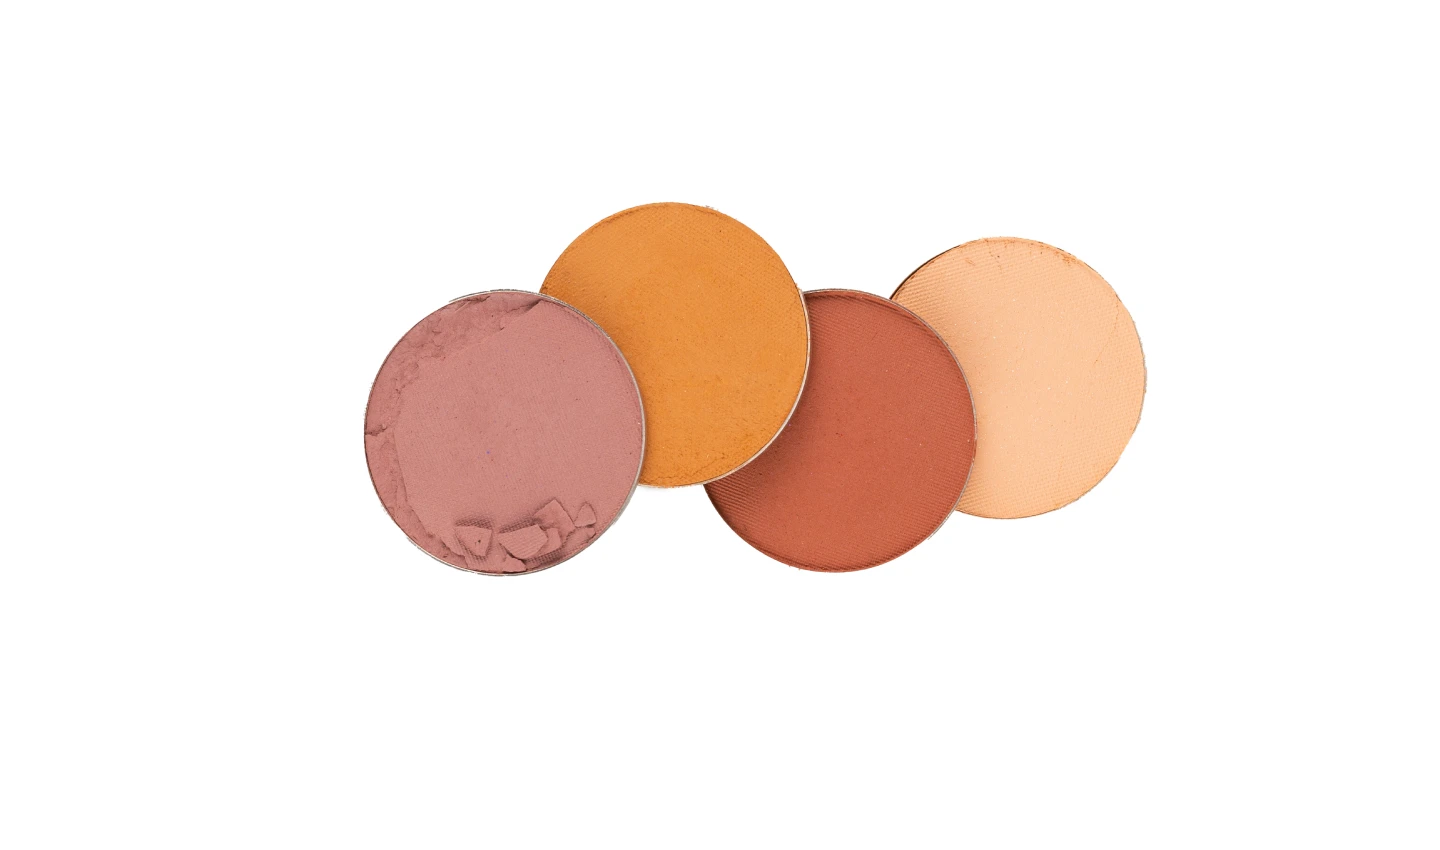 A collection of blushes in various shades, from peach to plum, arranged on a white background.